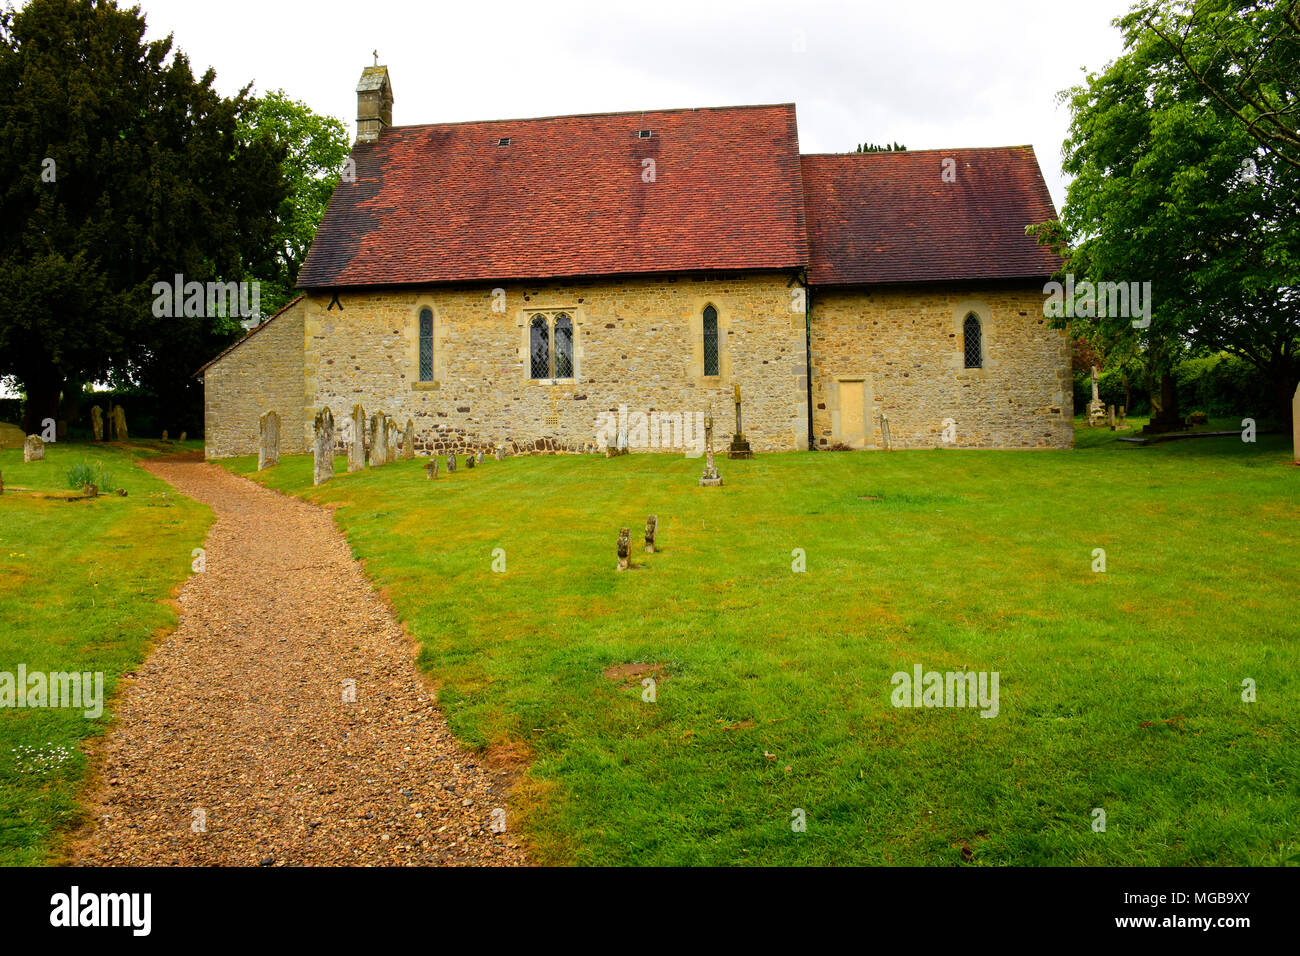 An Anglo-Saxon country church, found here in a rural area of Great Britain Stock Photo